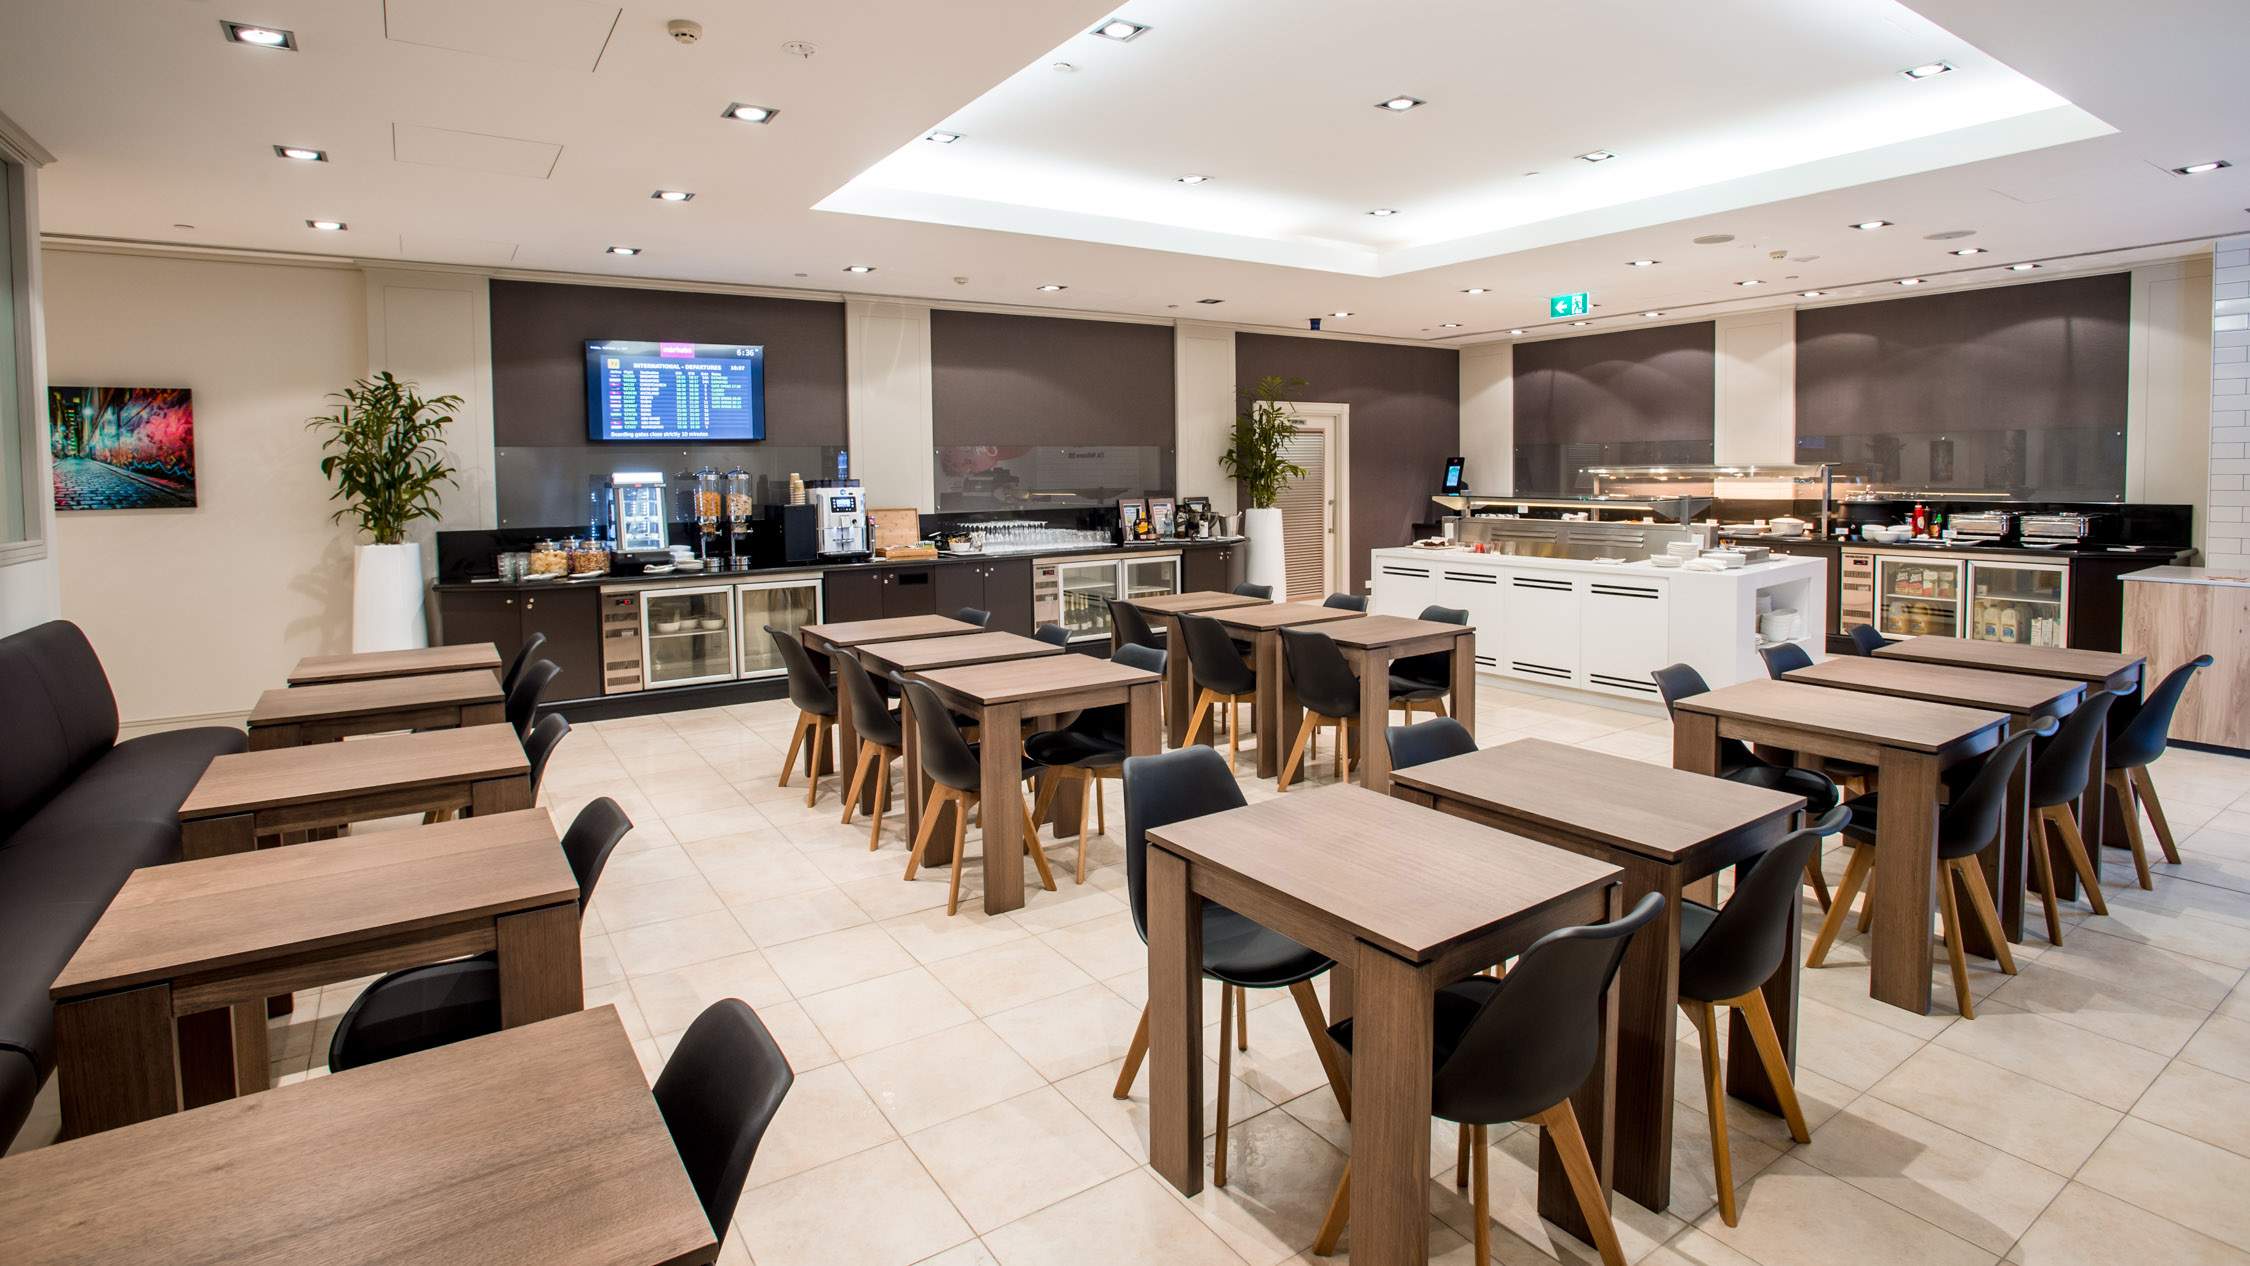 Melbourne Airport Now Features a Pay-As-You-Go Lounge That Anyone Can Use